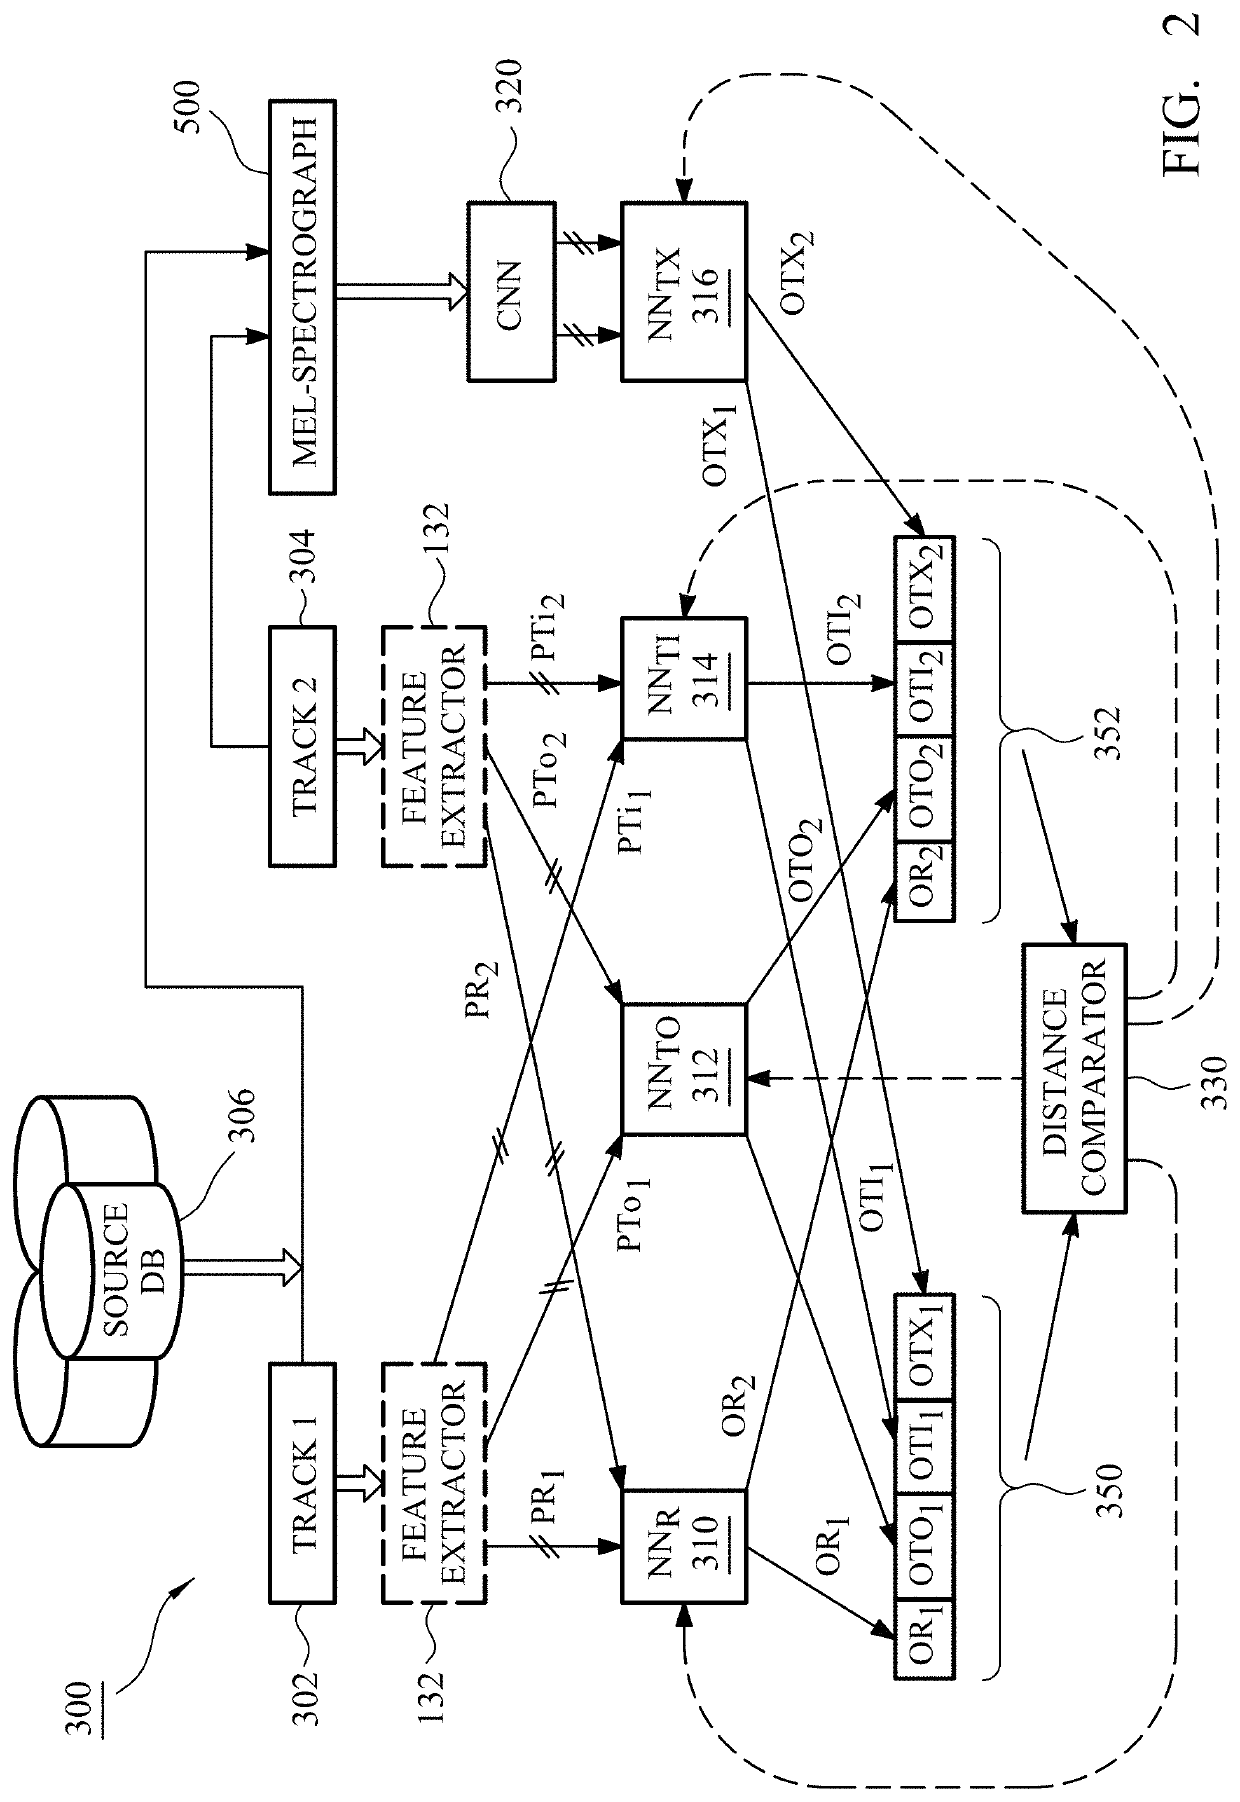 Method of training a neural network and related system and method for categorizing and recommending associated content